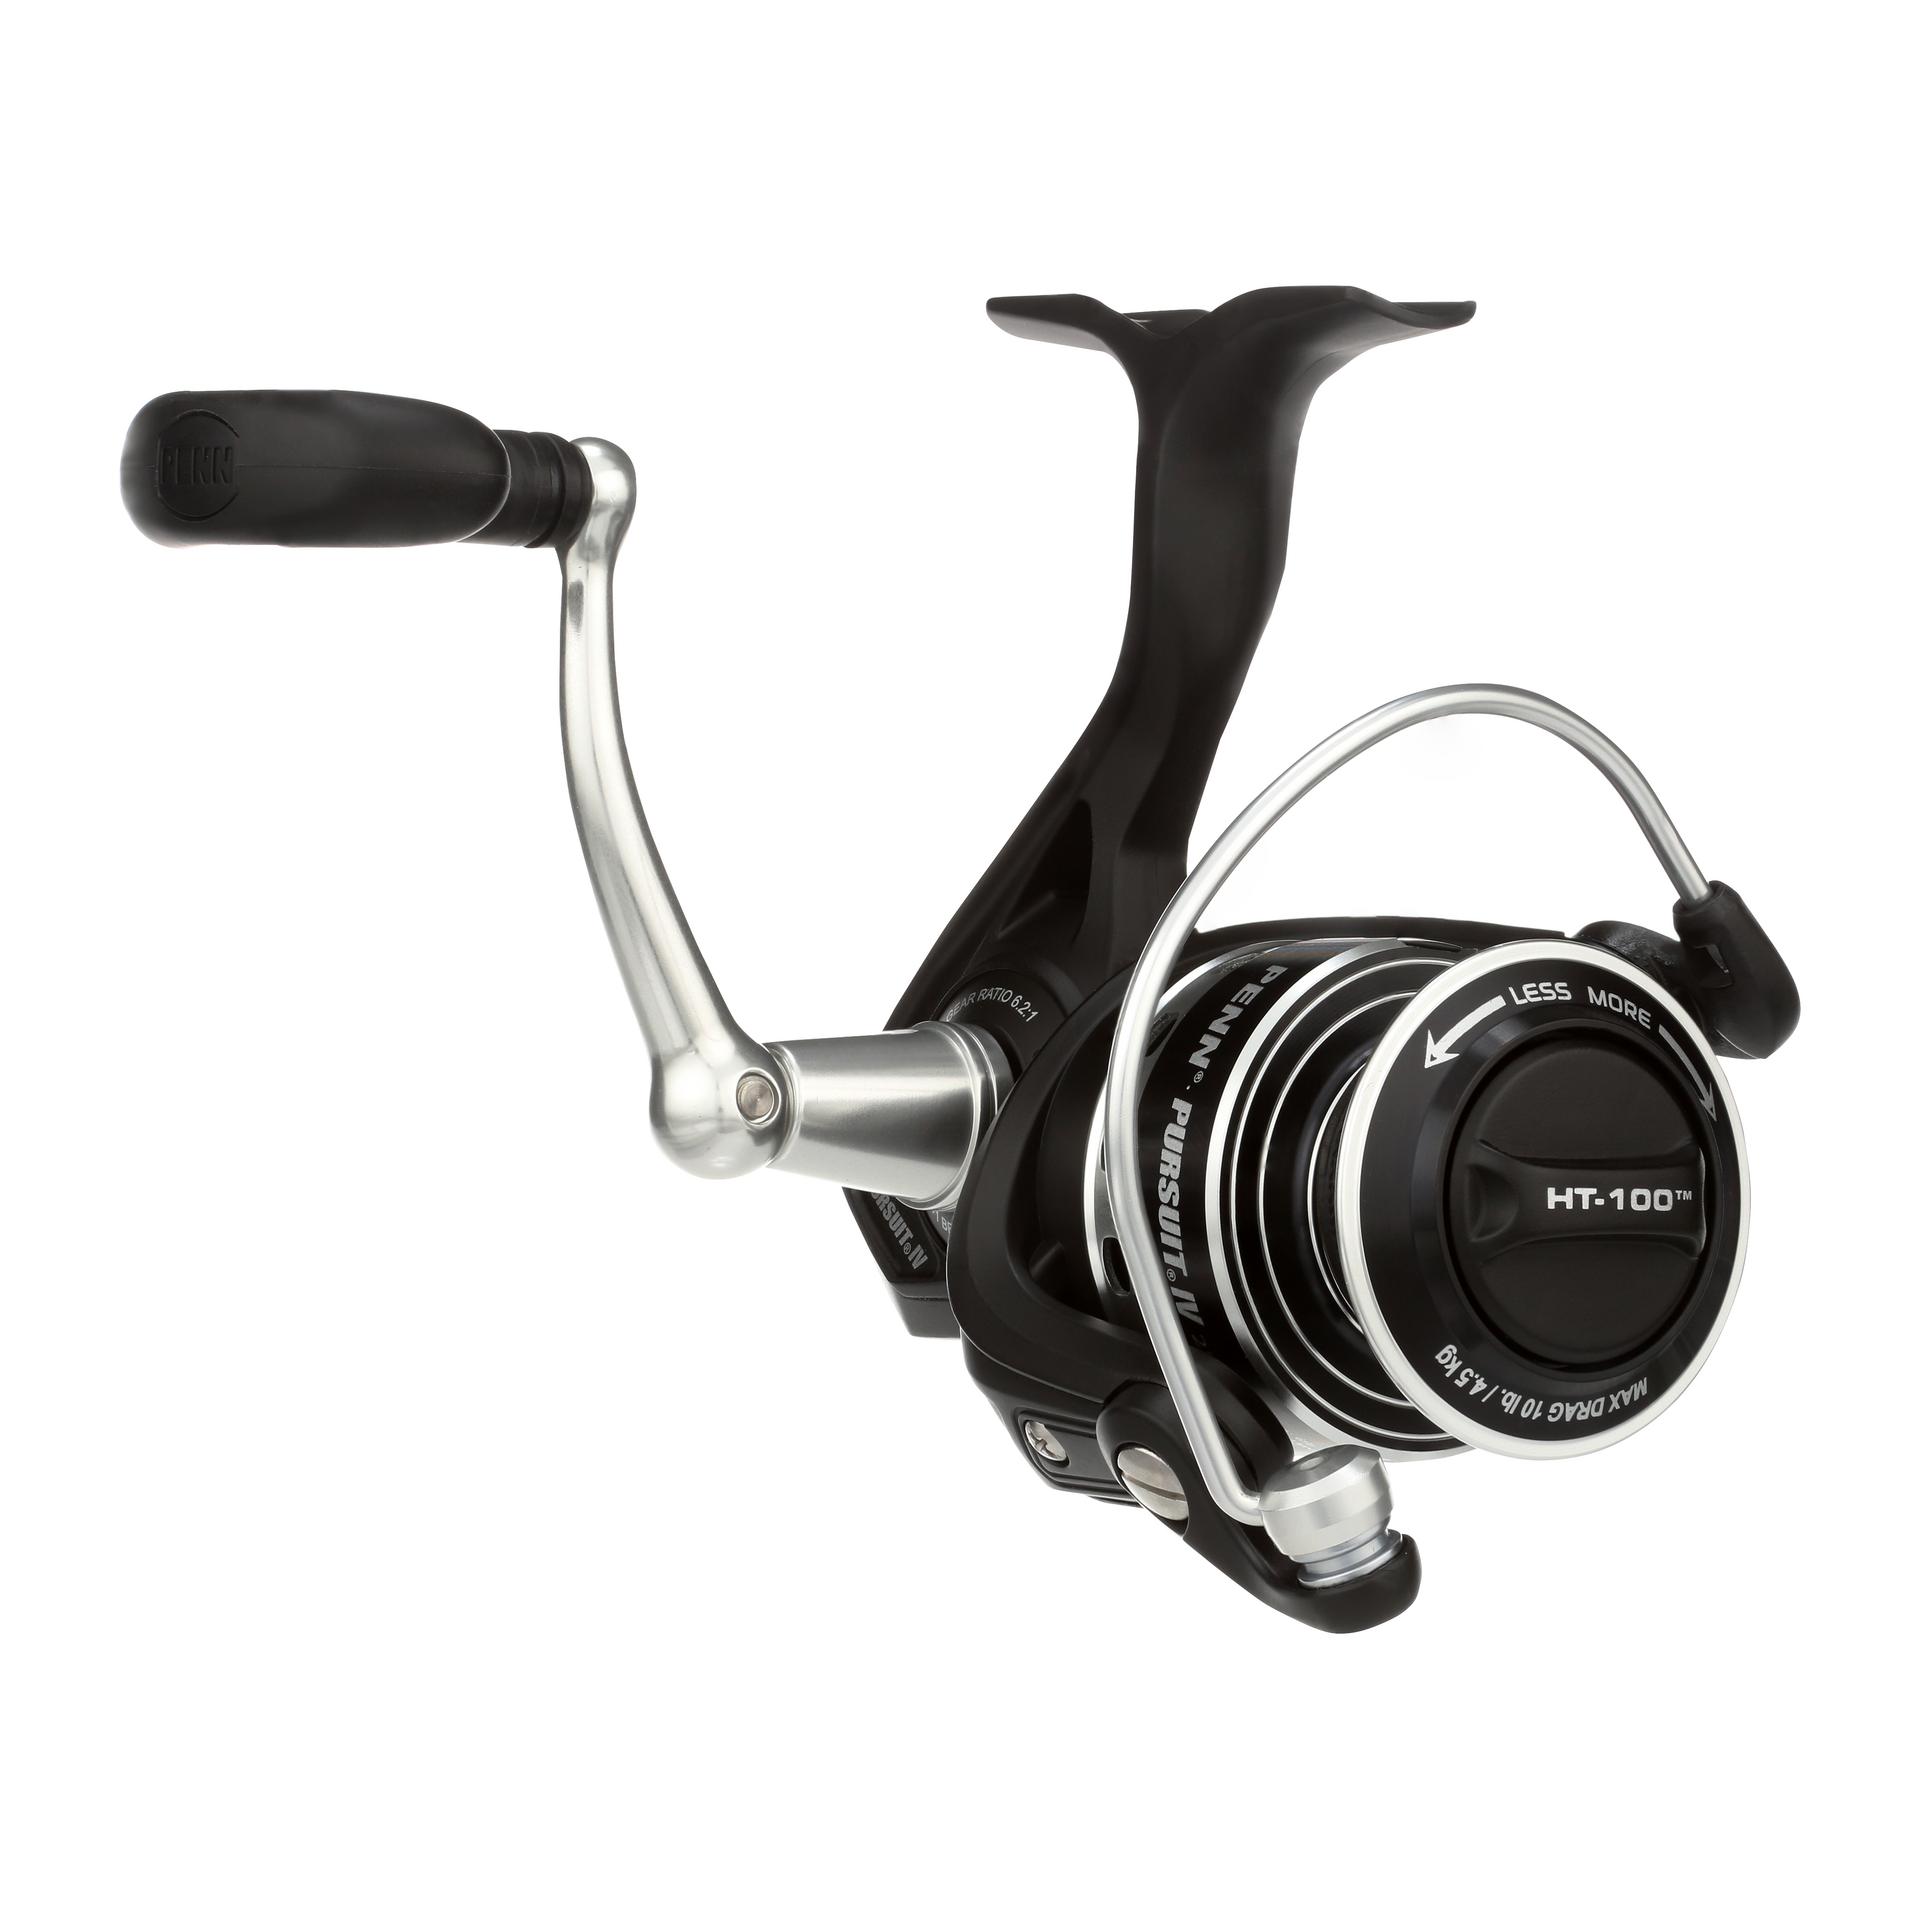 PENN Pursuit IV Inshore Spinning Fishing Reel, Size 3000, HT-100 Front  Drag, Max of 12lb, 5 Sealed Stainless Steel Ball Bearing System, Built with  Carbon Fiber Drag Washers, Black Silver : Buy